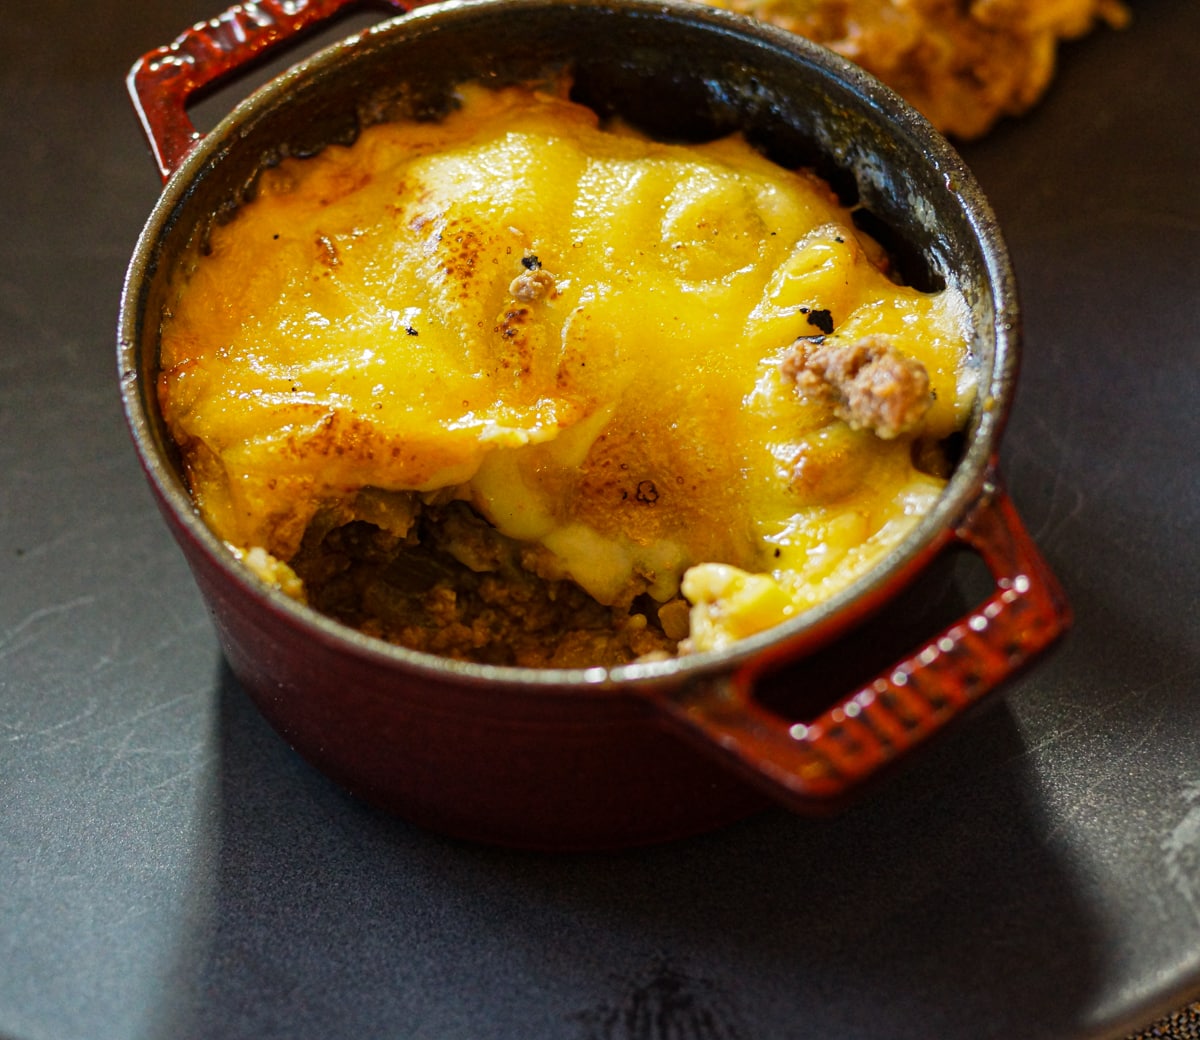 Keshi Yena, the National dish of Aruba in a red cocotte.